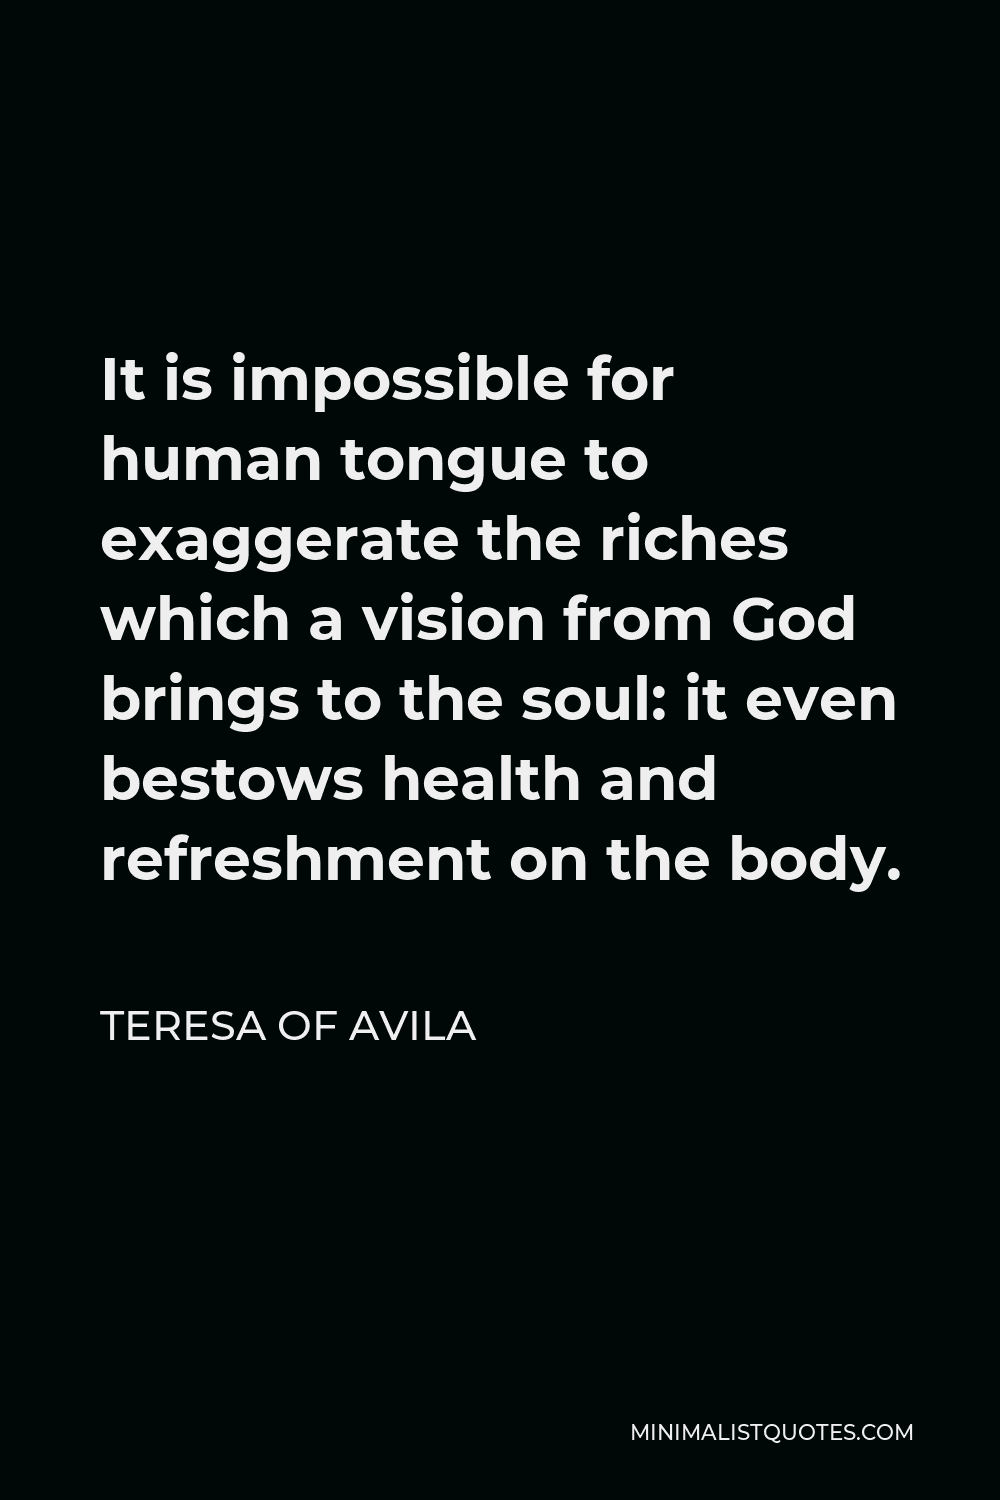 Teresa of Avila Quote - It is impossible for human tongue to exaggerate the riches which a vision from God brings to the soul: it even bestows health and refreshment on the body.